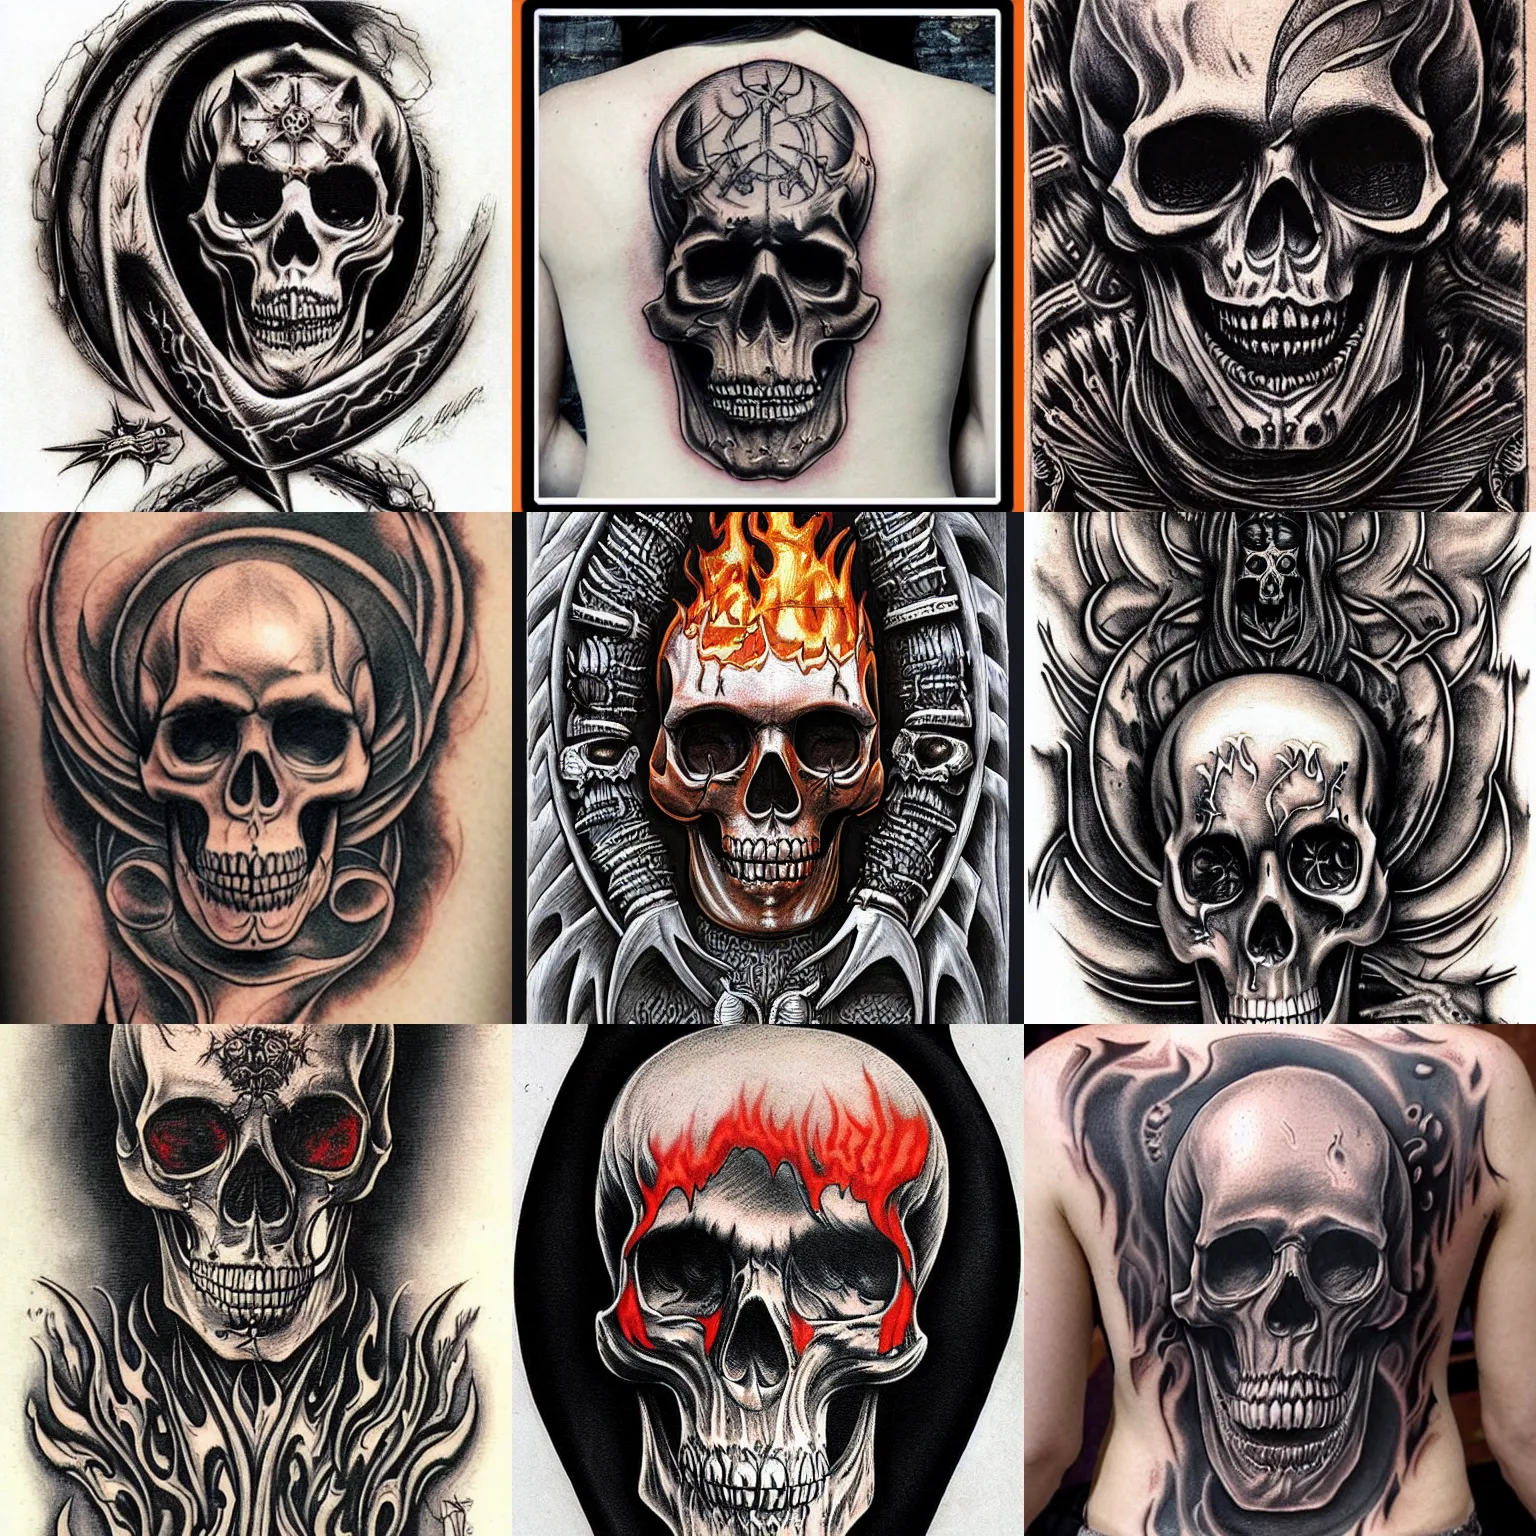 Smiling Skull Tattoo – Out of Kit